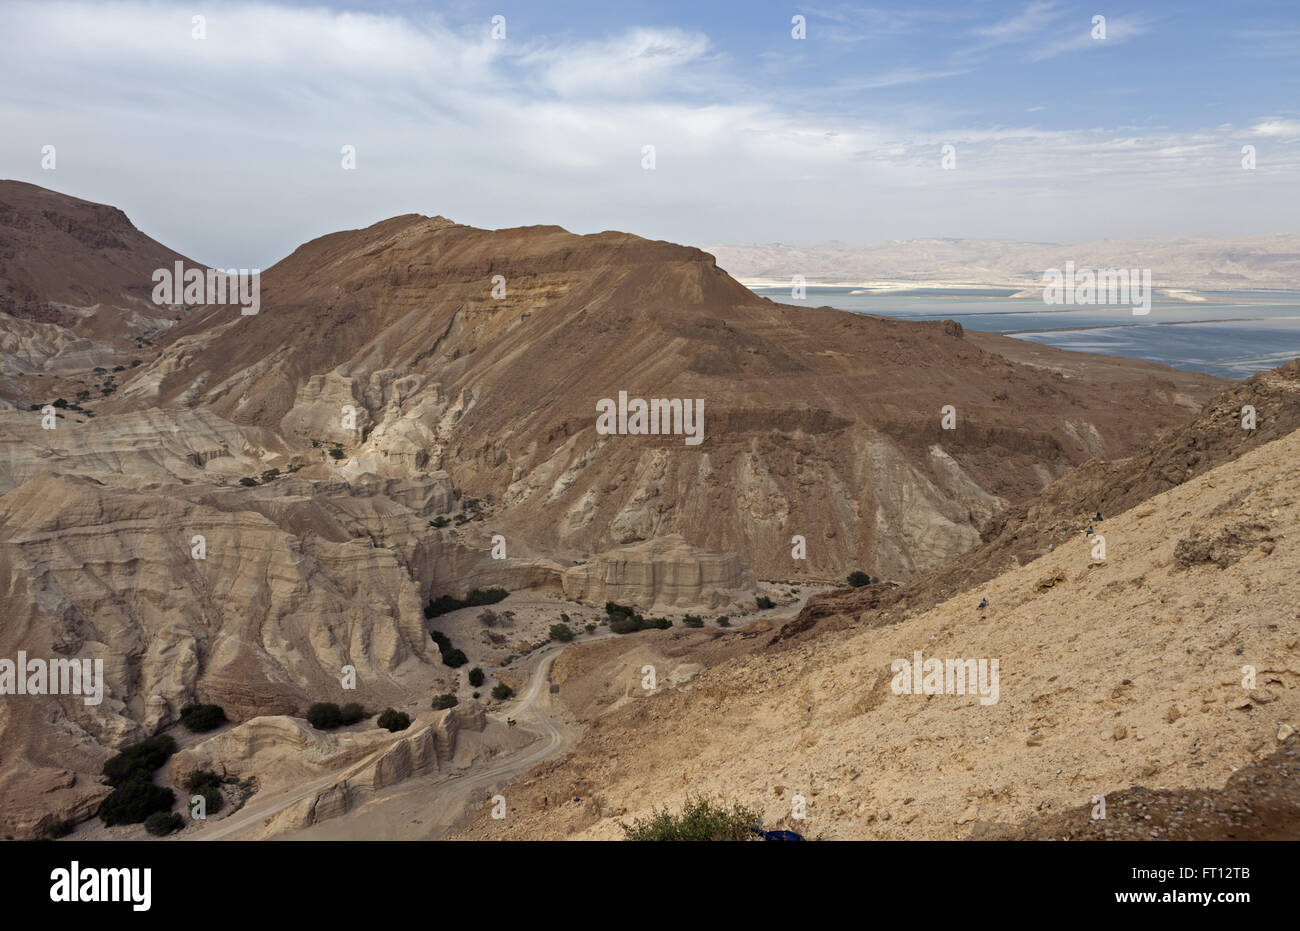 The canyons of Nahal Kidron in the Judean desert and the Dead Sea, Israel, Asia Stock Photo